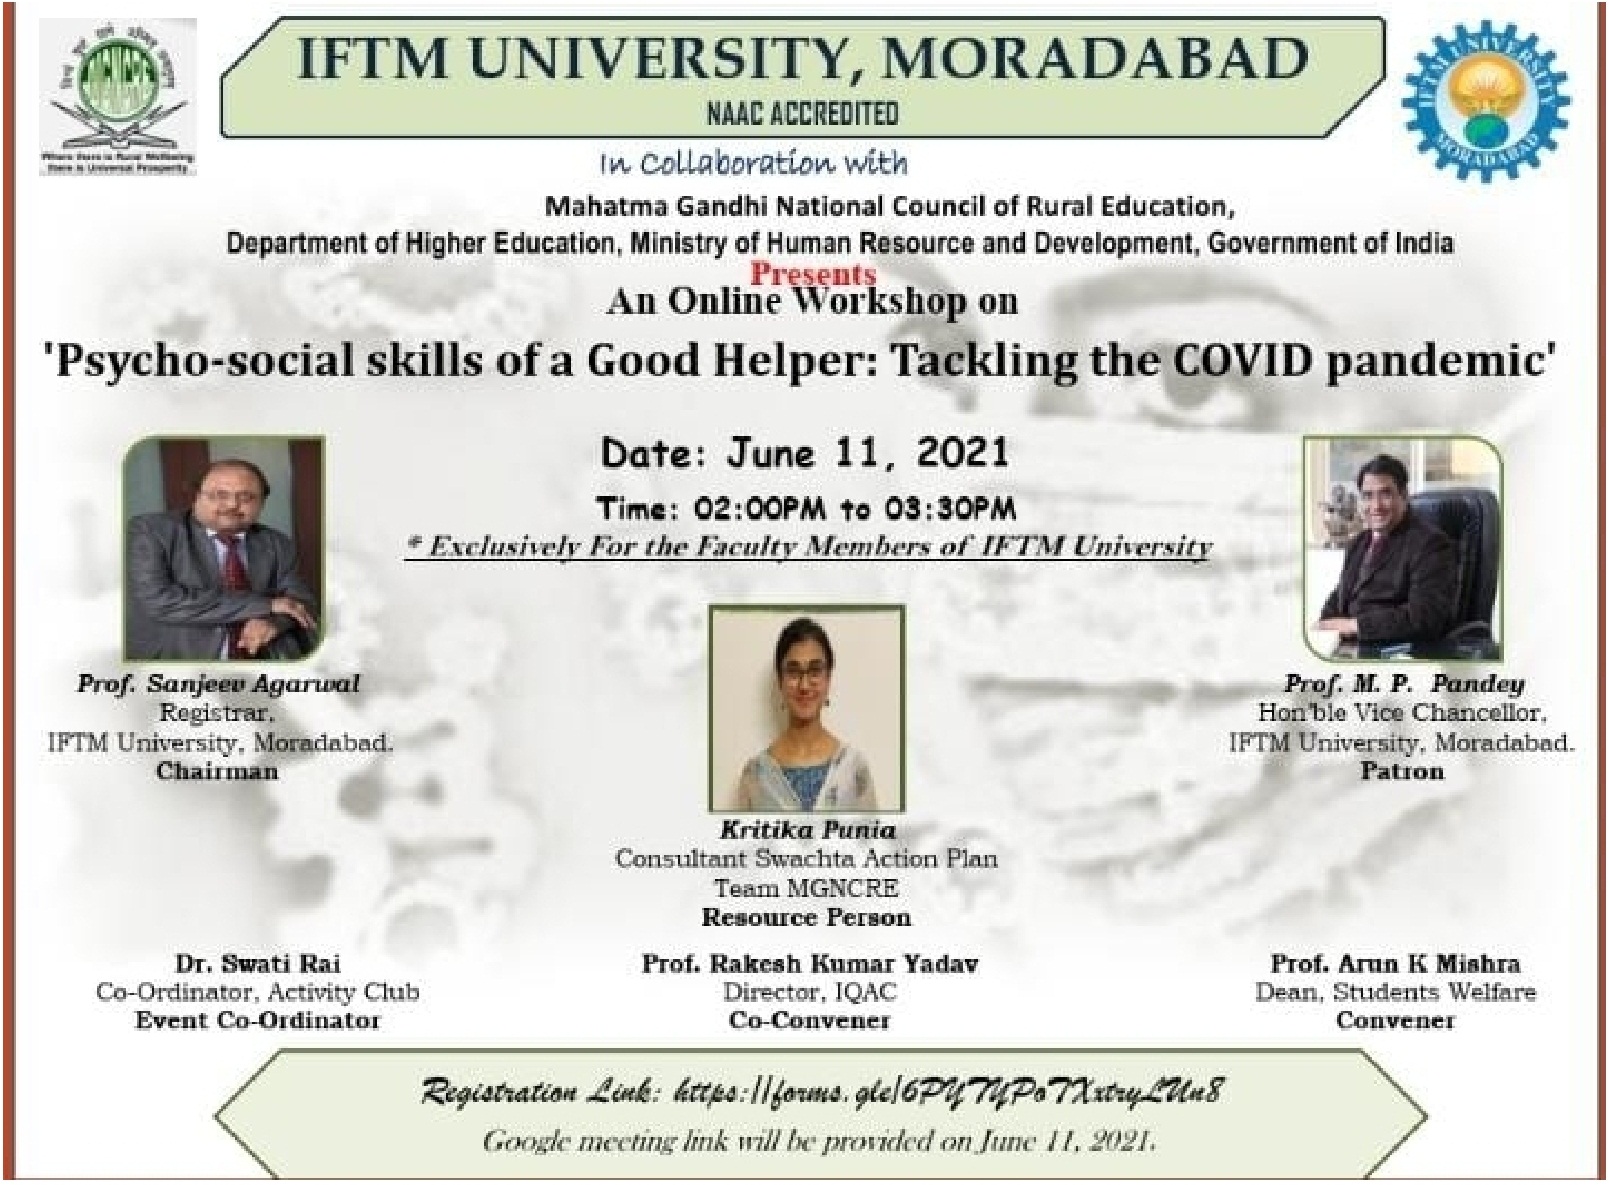 An Online Workshop on "Psycho-social skill of a Good Helper: Tackling the COVID pandemic".